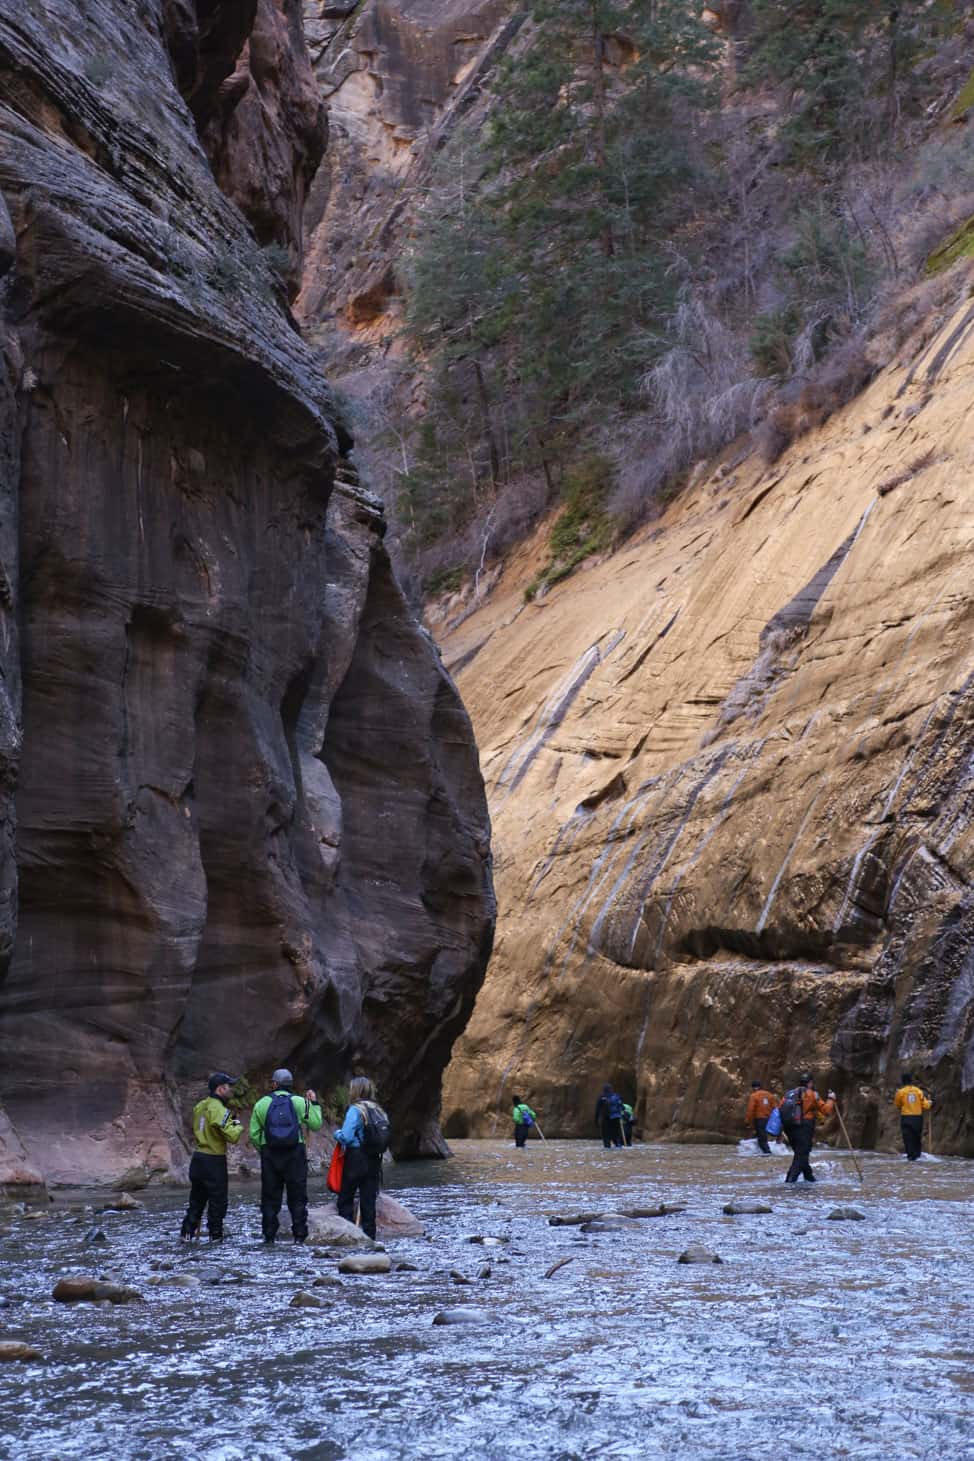 Zion National Park: Everything You Need to Know About Hiking the Narrows